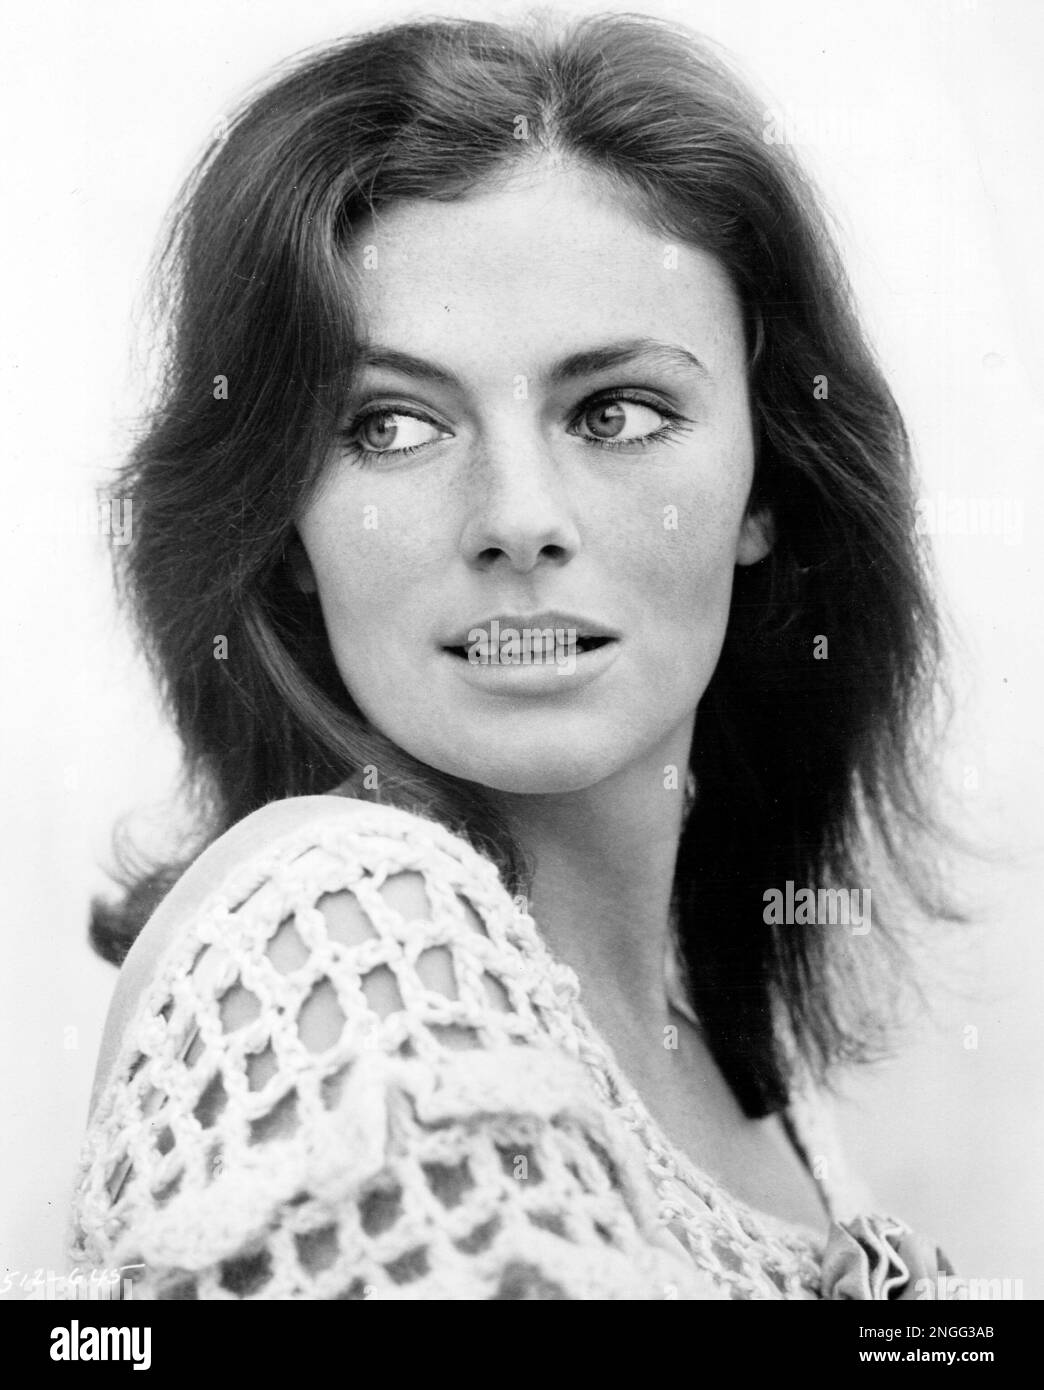 Jacqueline bisset jacqueline bisset jacqueline Black and White Stock ...